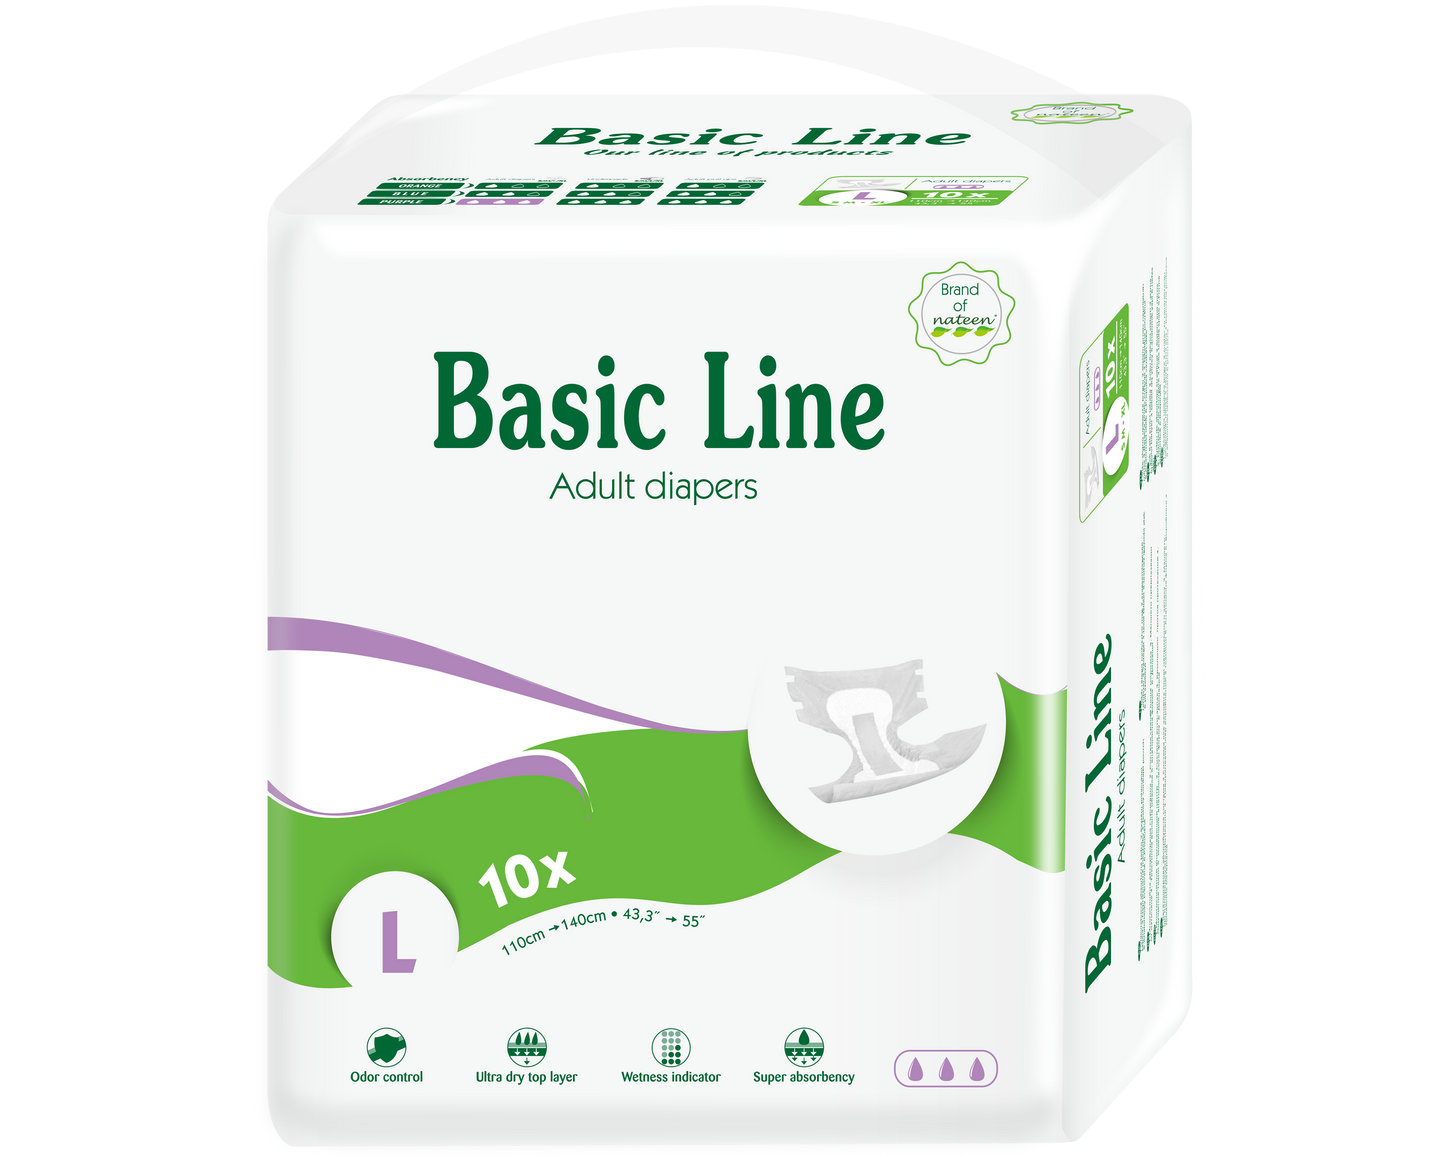 Adult Briefs/Diapers, Basic Line by Nateen